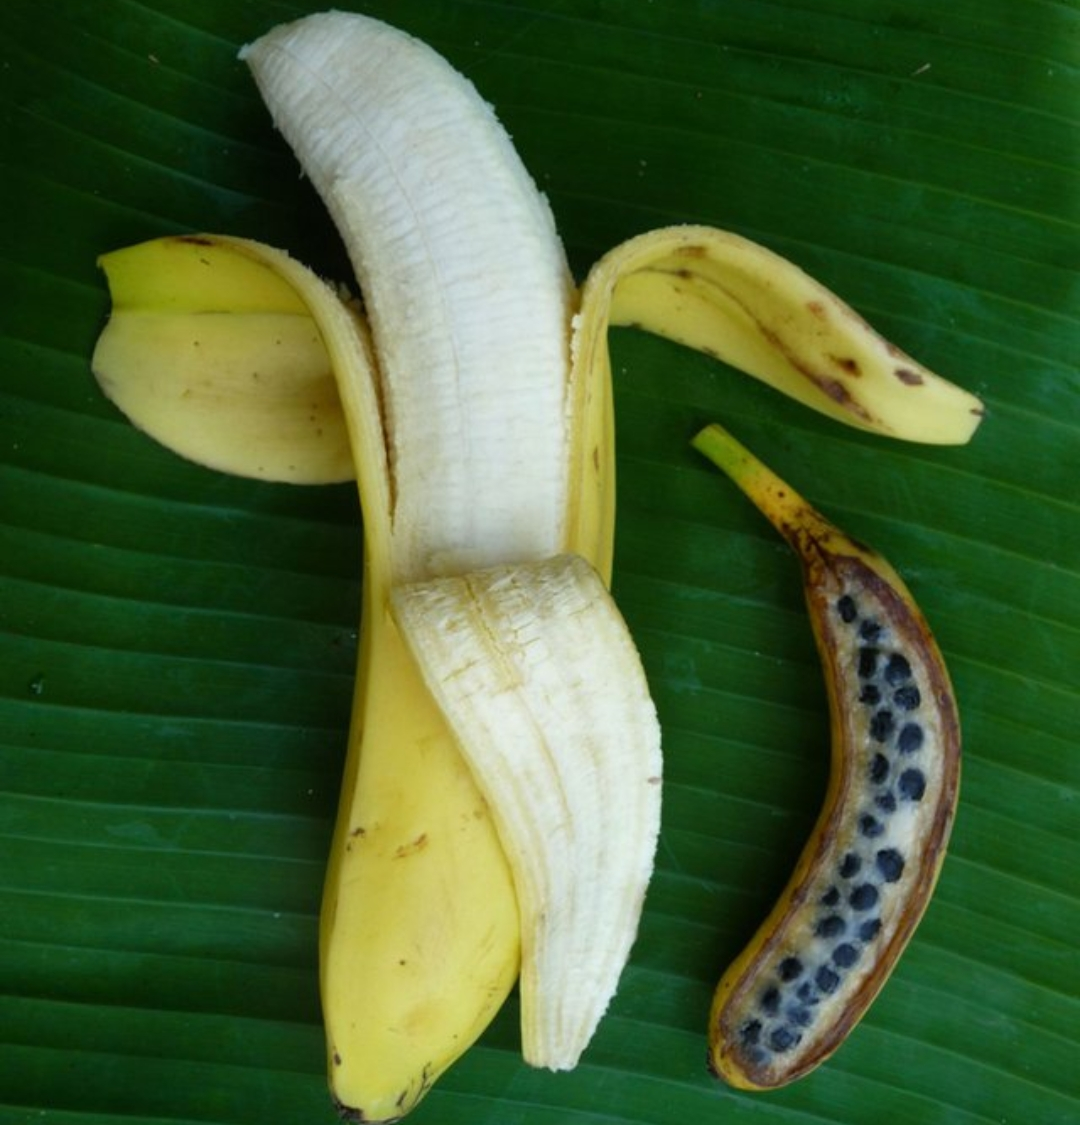 A banana peeled open next to a much smaller, half-sliced banana displaying its unexpected blue-seed-filled interior